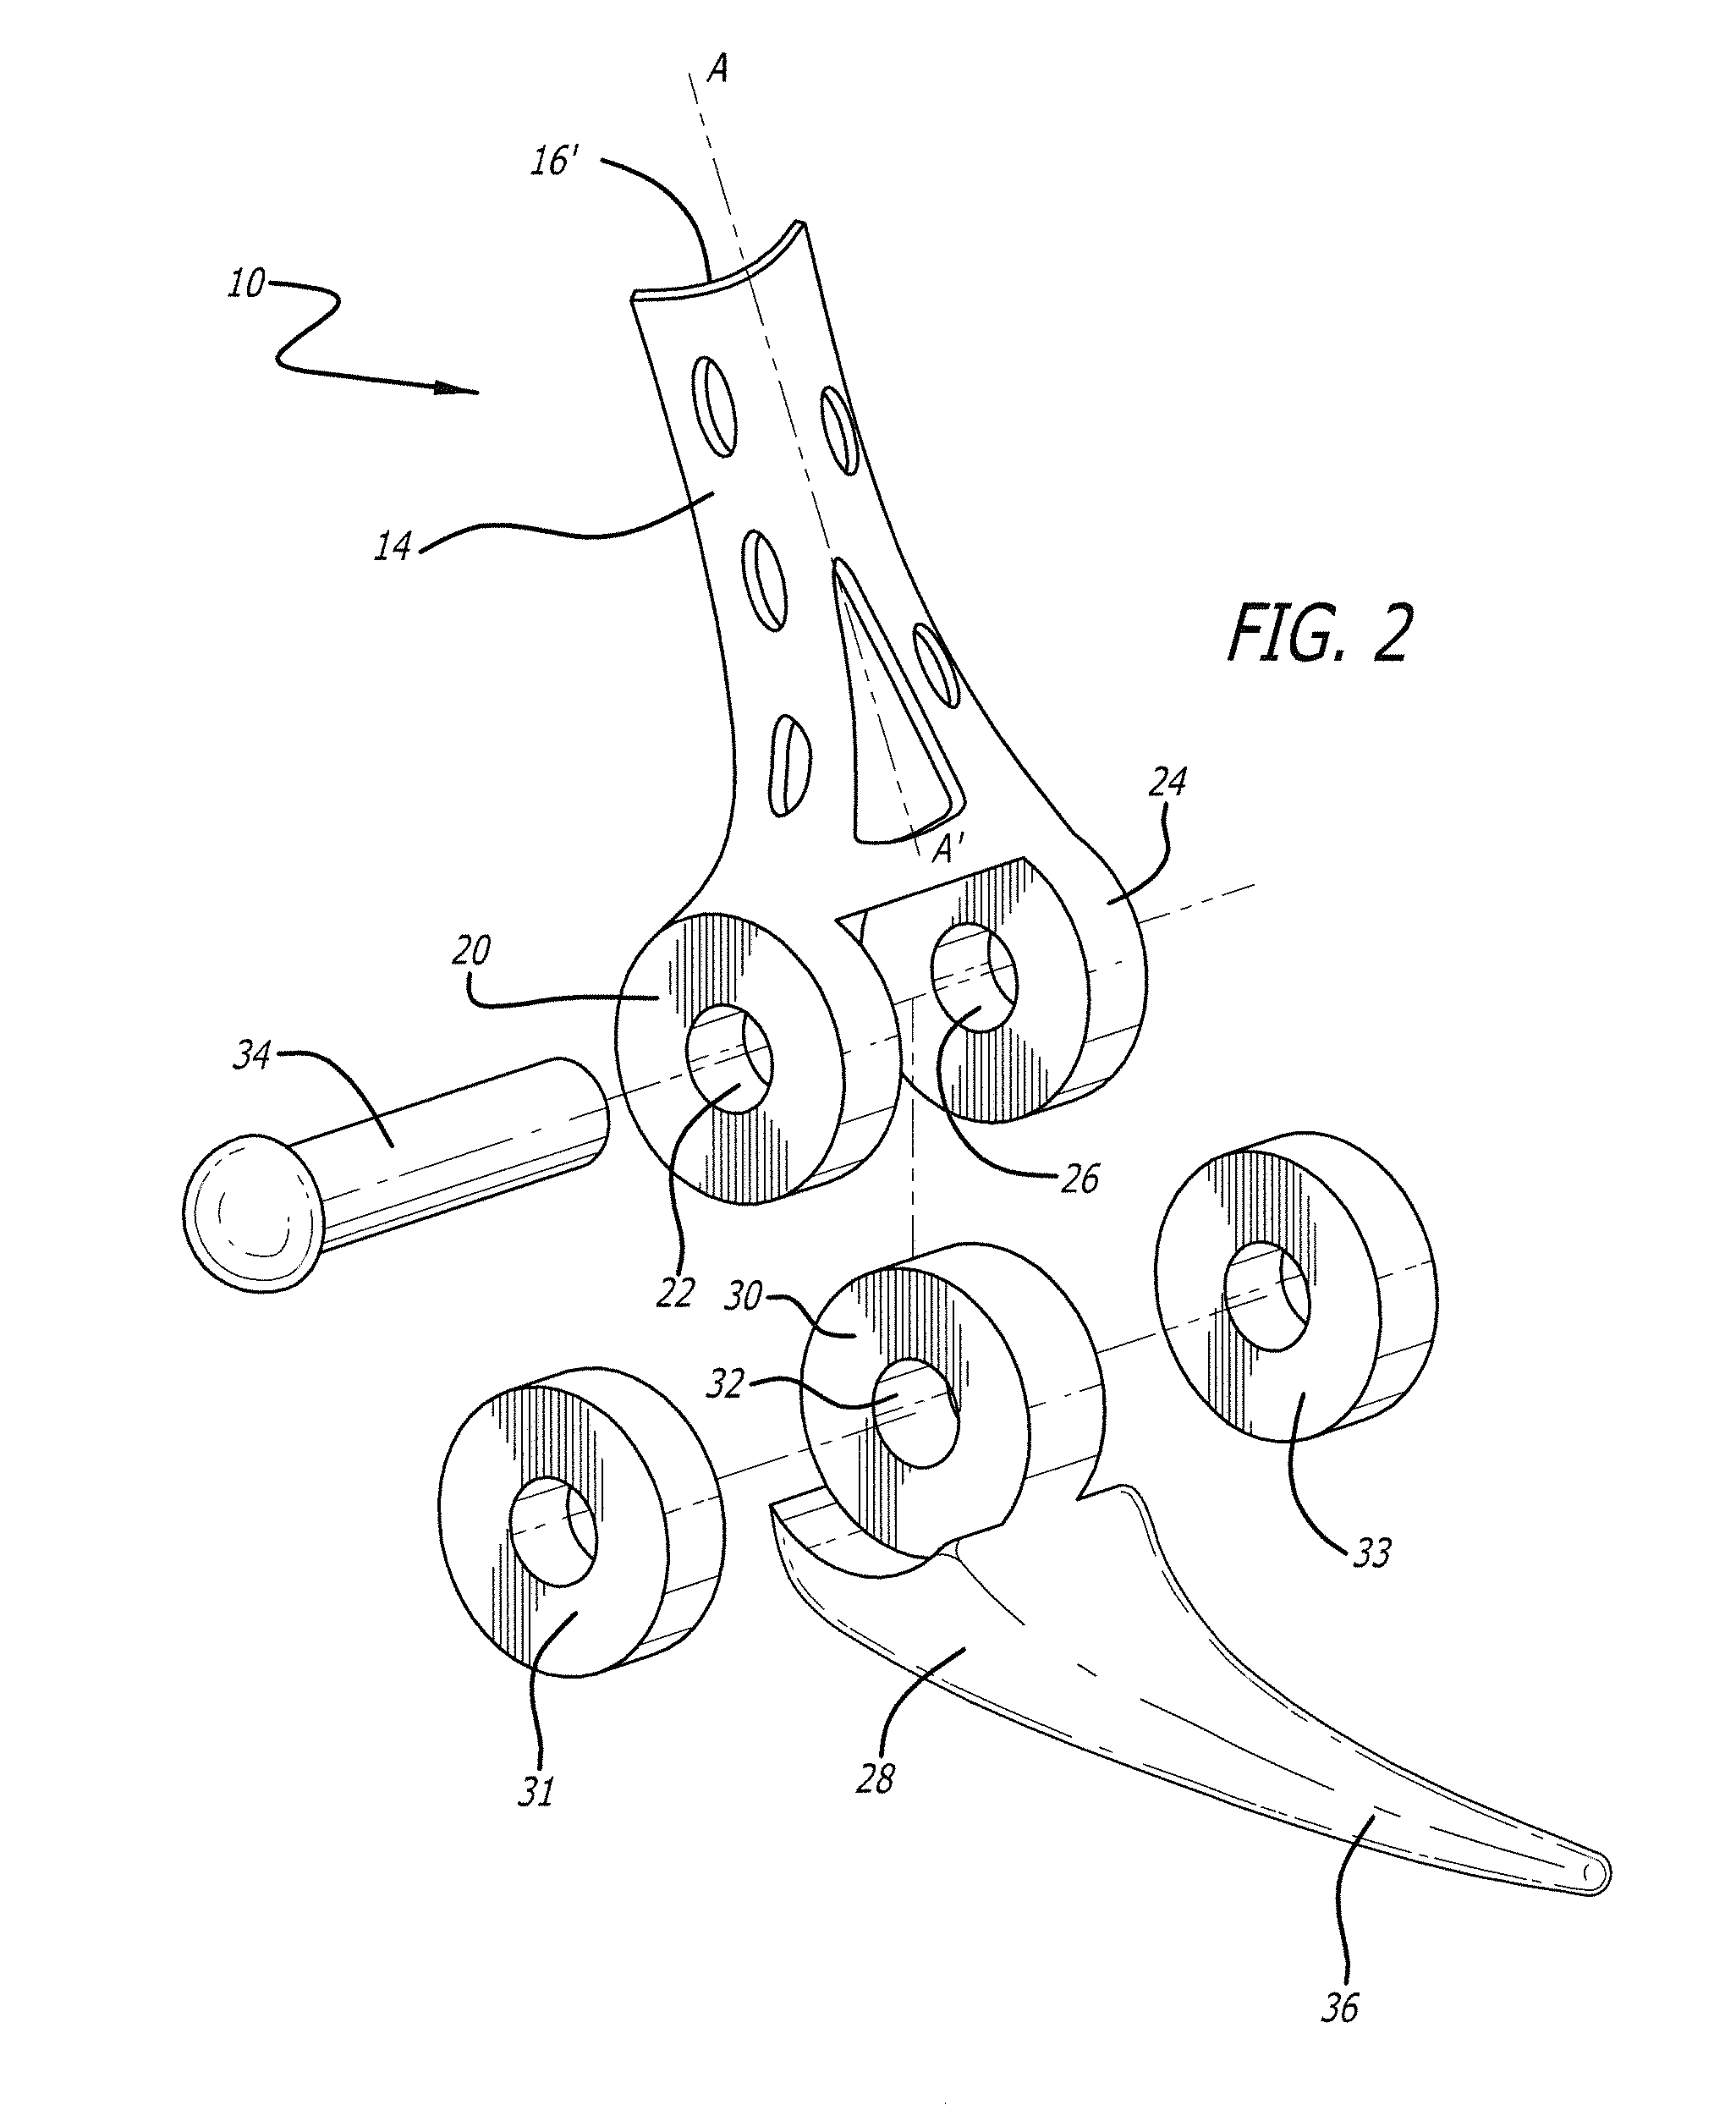 Bone joint replacement and repair assembly and method of repairing and replacing a bone joint